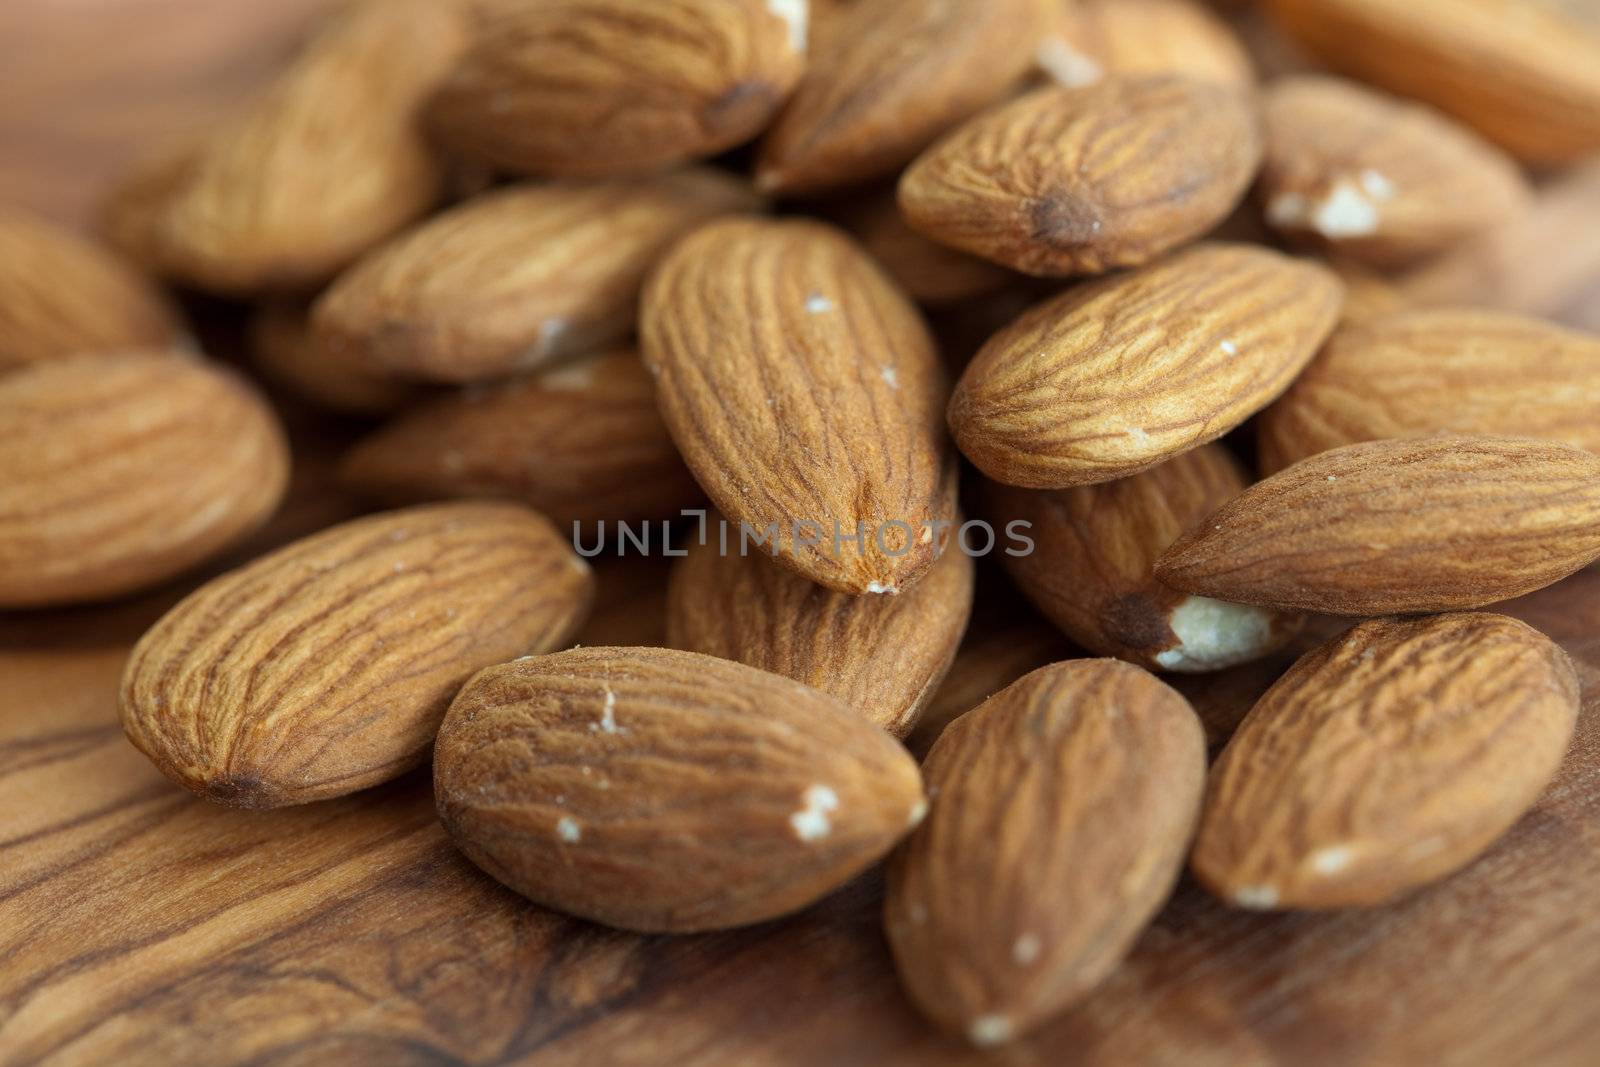 Delicious almonds with peel still on in a pile on wooden surface